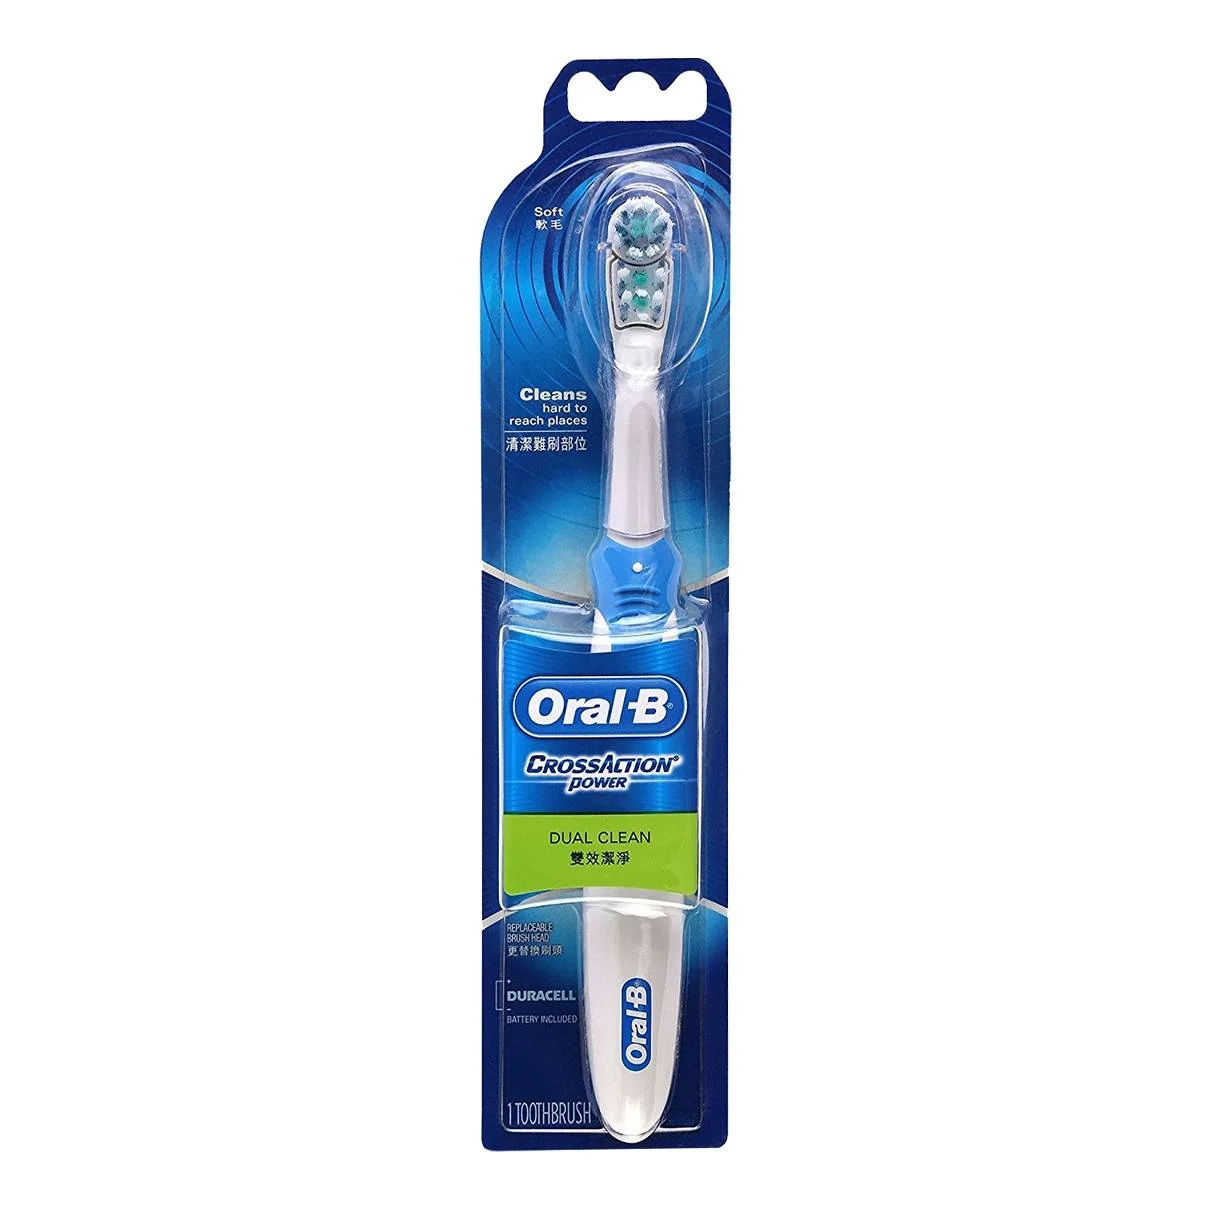 Oral-B CrossAction Battery Toothbrush undefined